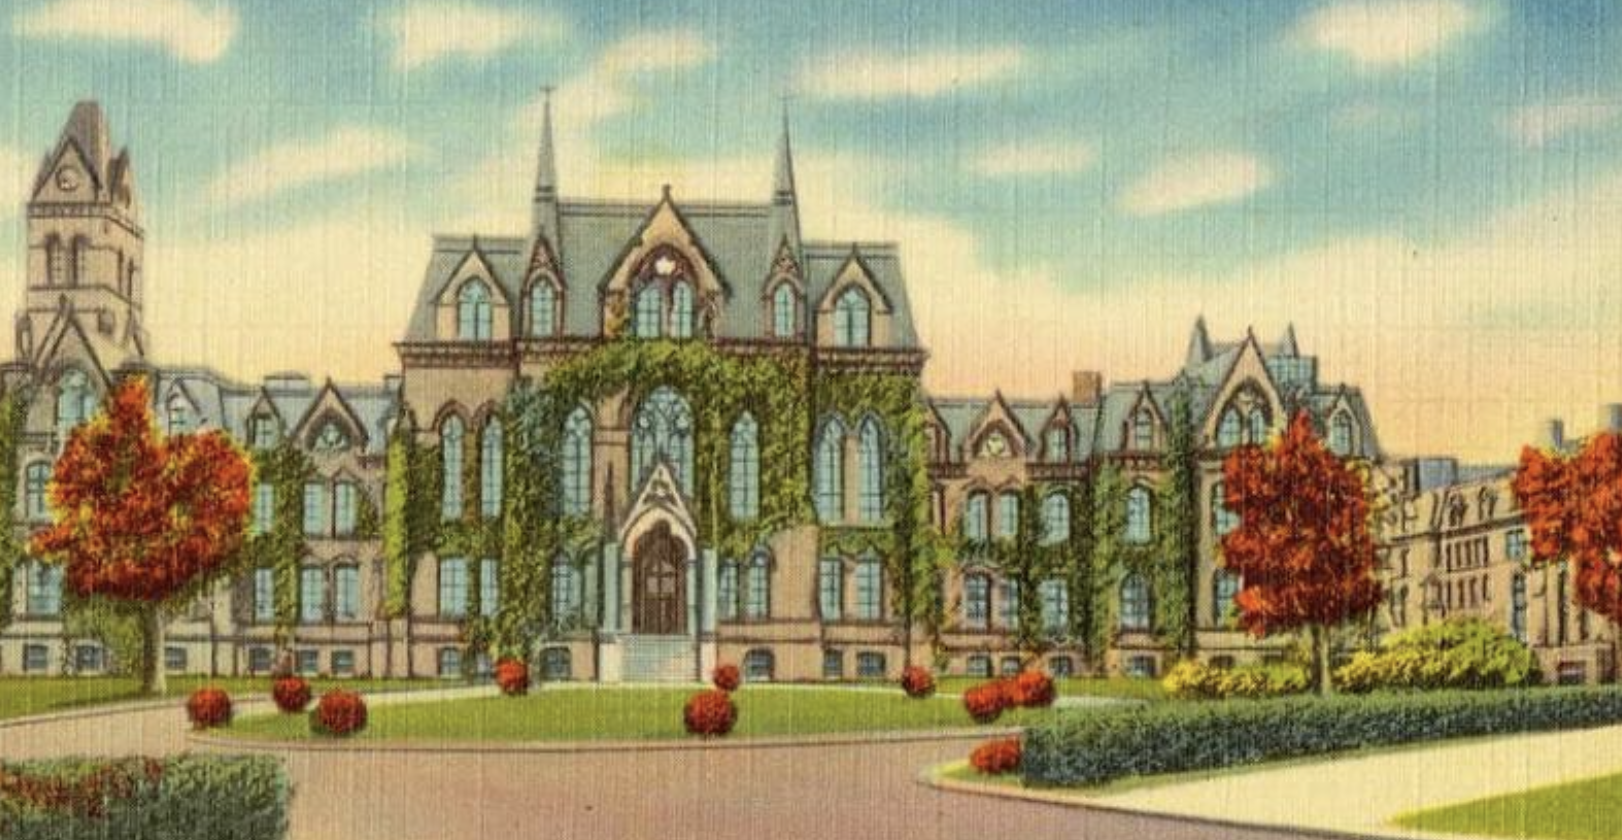 Archival illustration in full color of college campus in bloom with historic old building covered in ivy